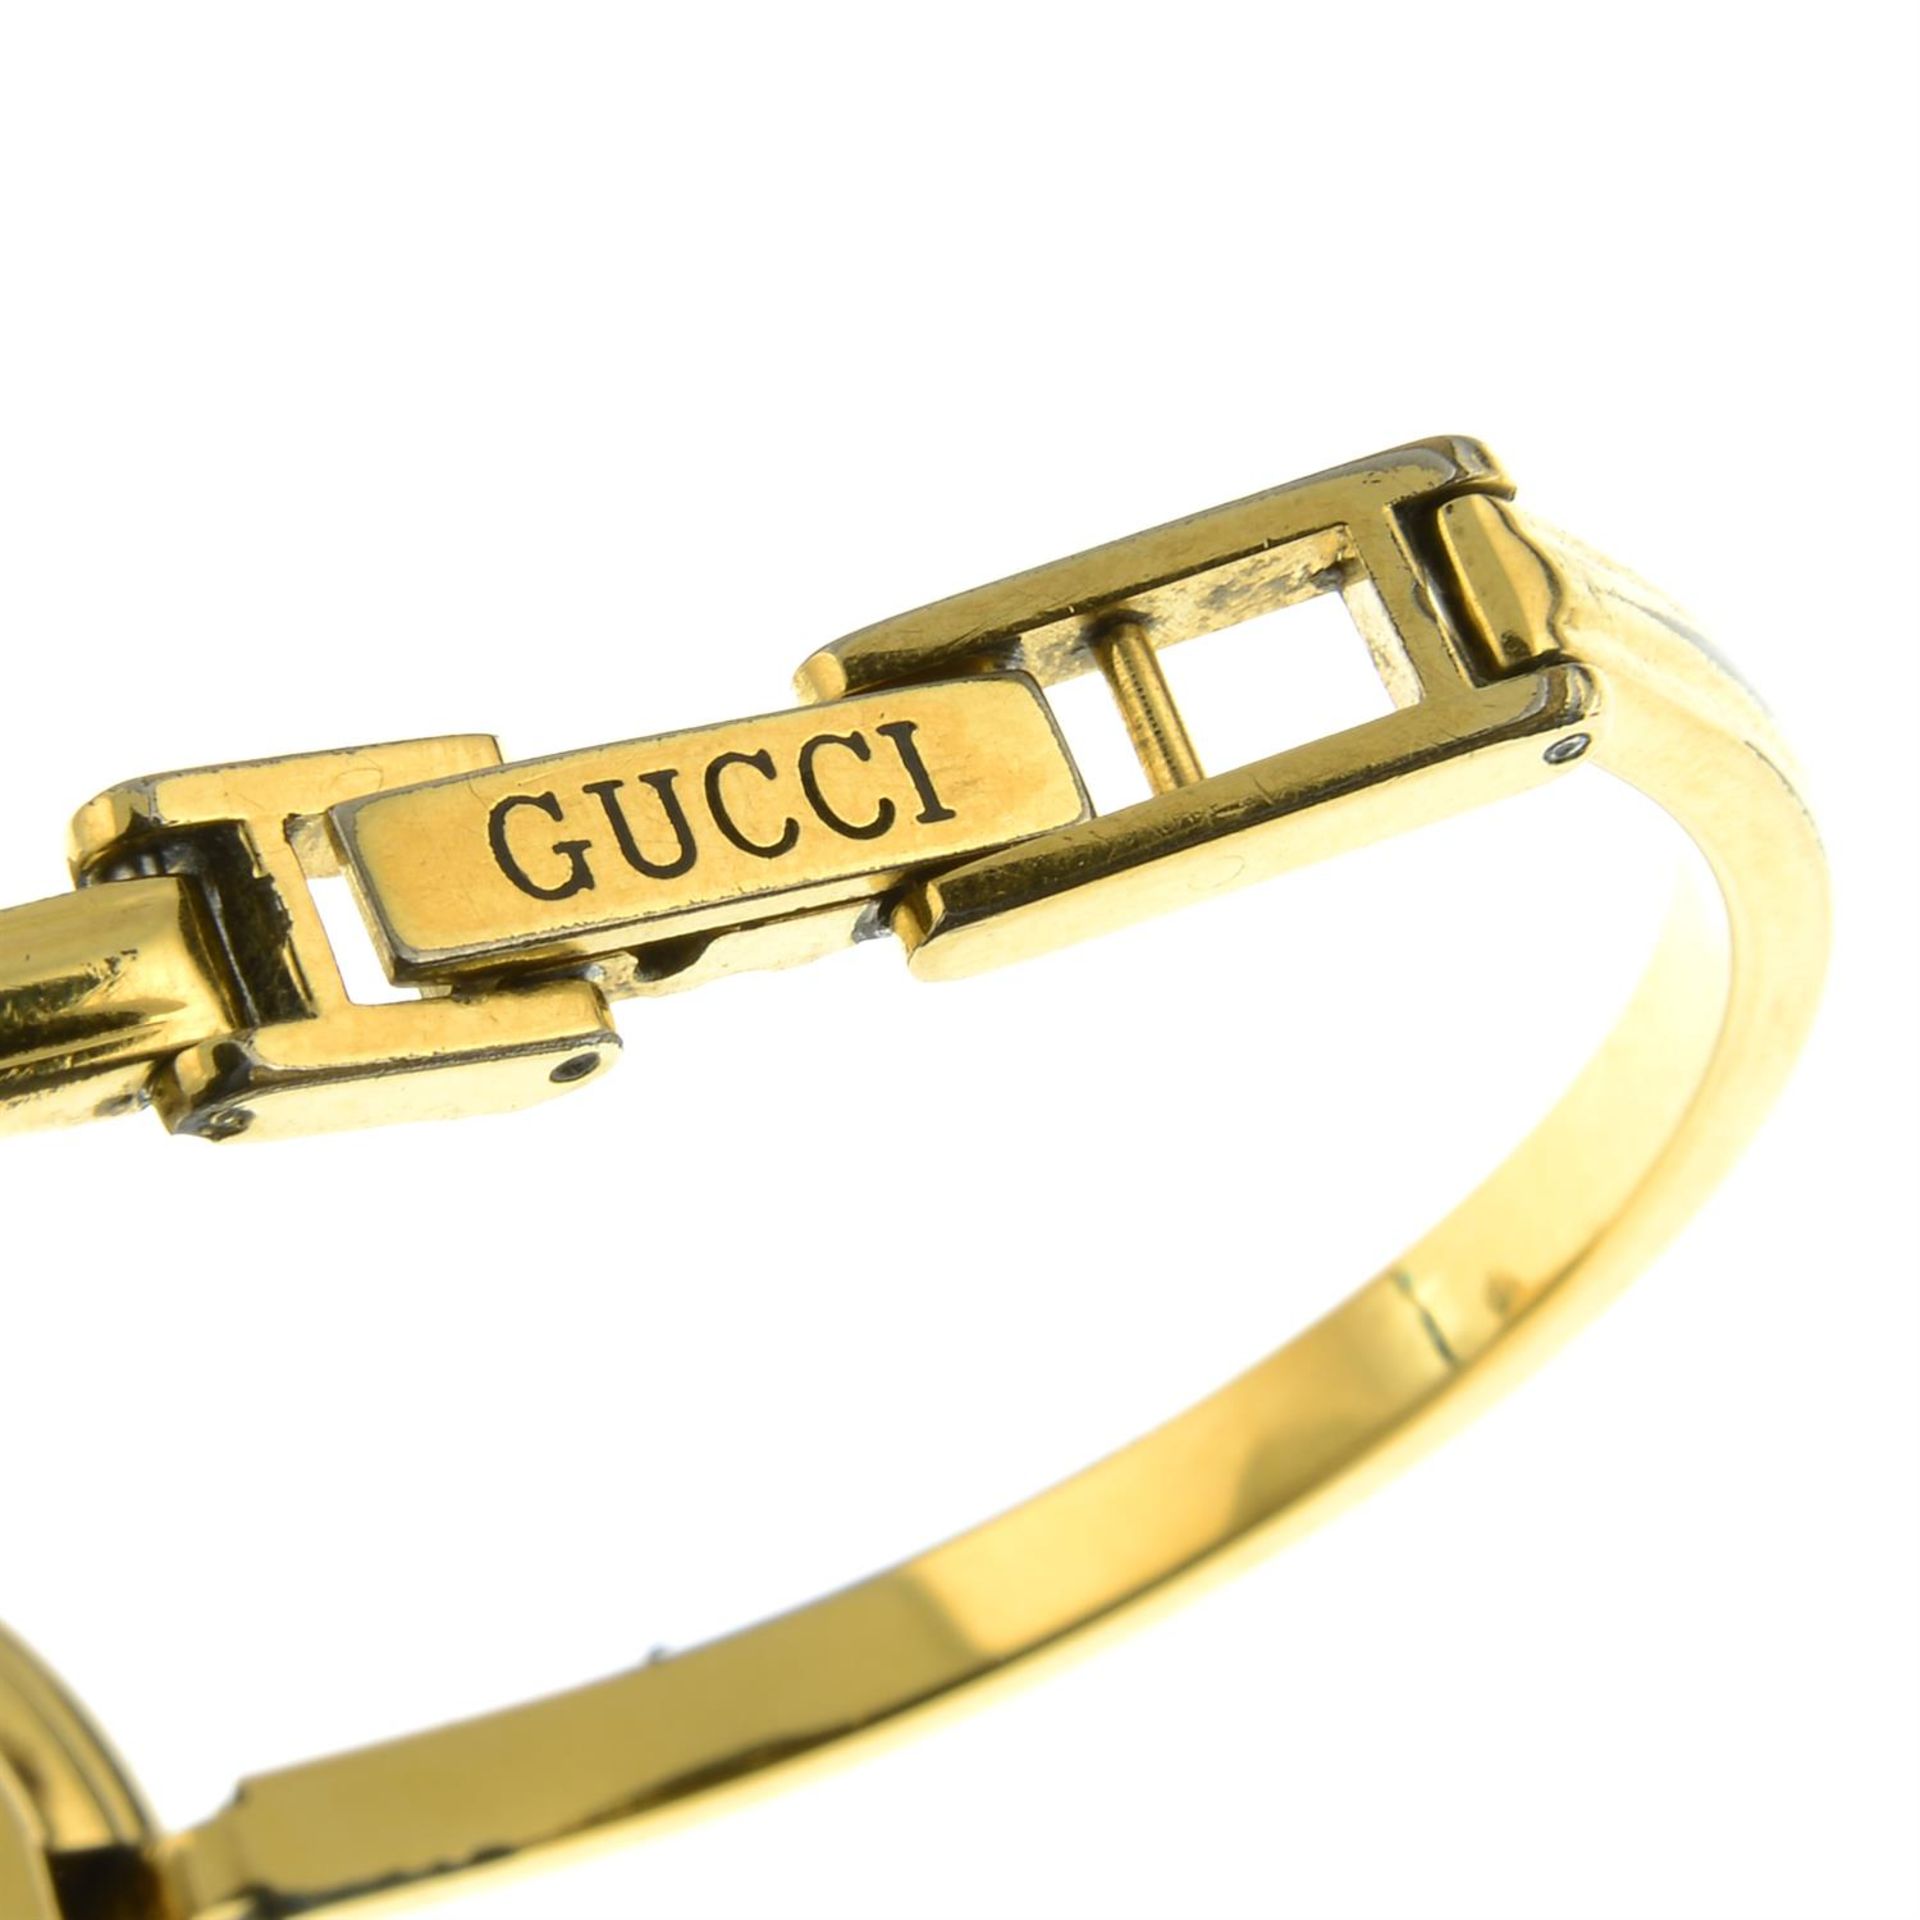 GUCCI - a 1100L watch with interchangeable bezels. - Image 3 of 5